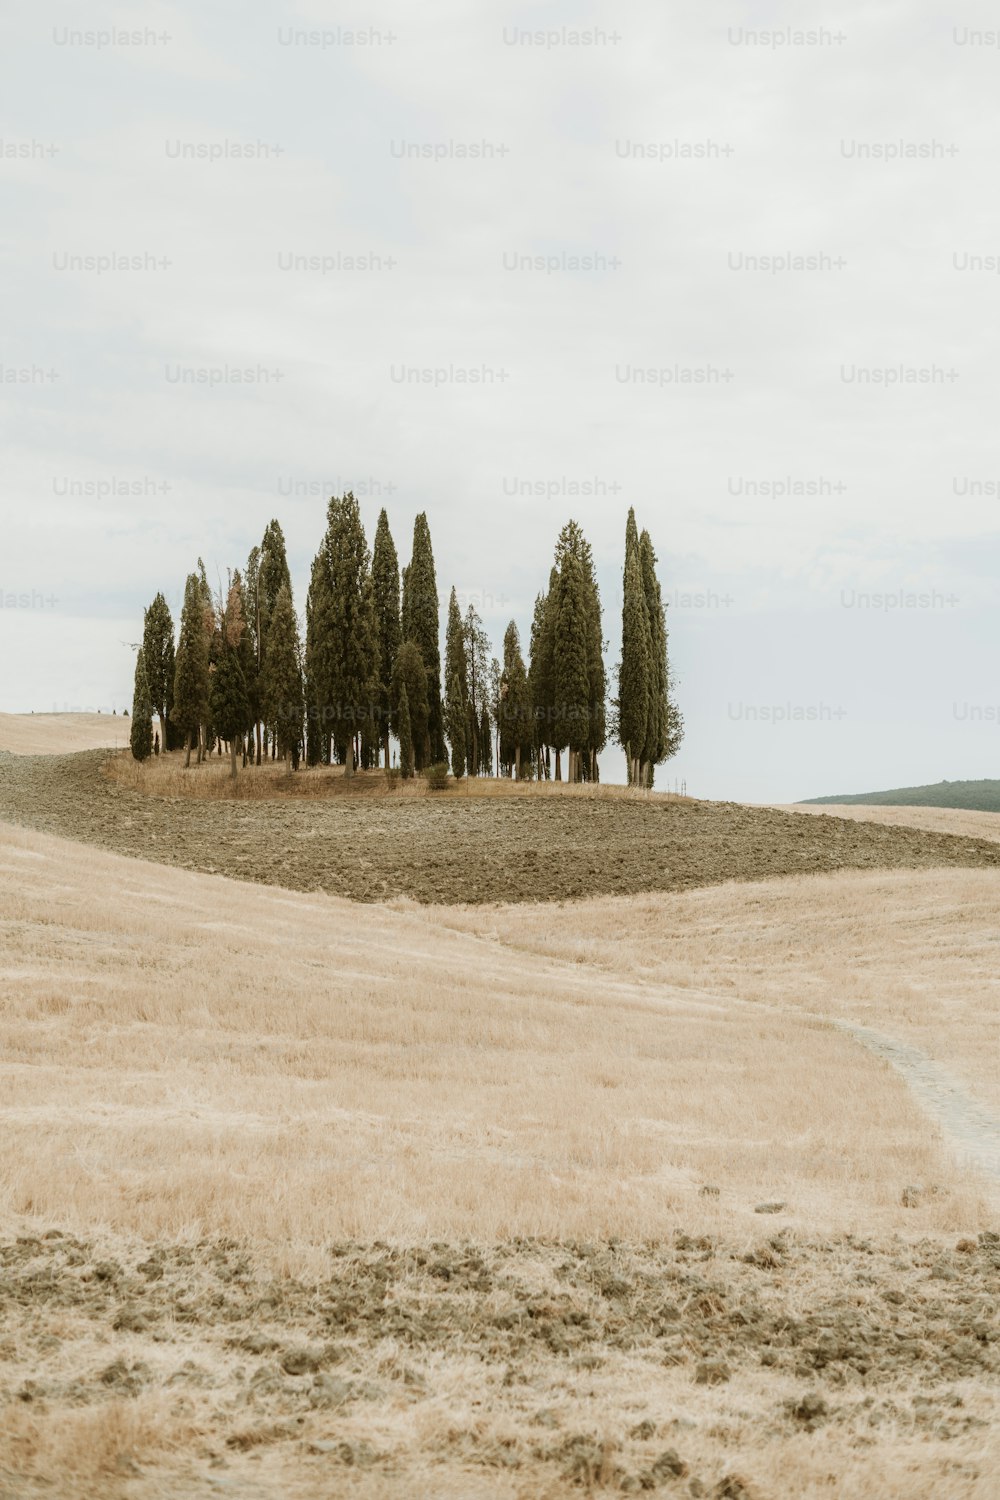 a group of trees in a field near a dirt road